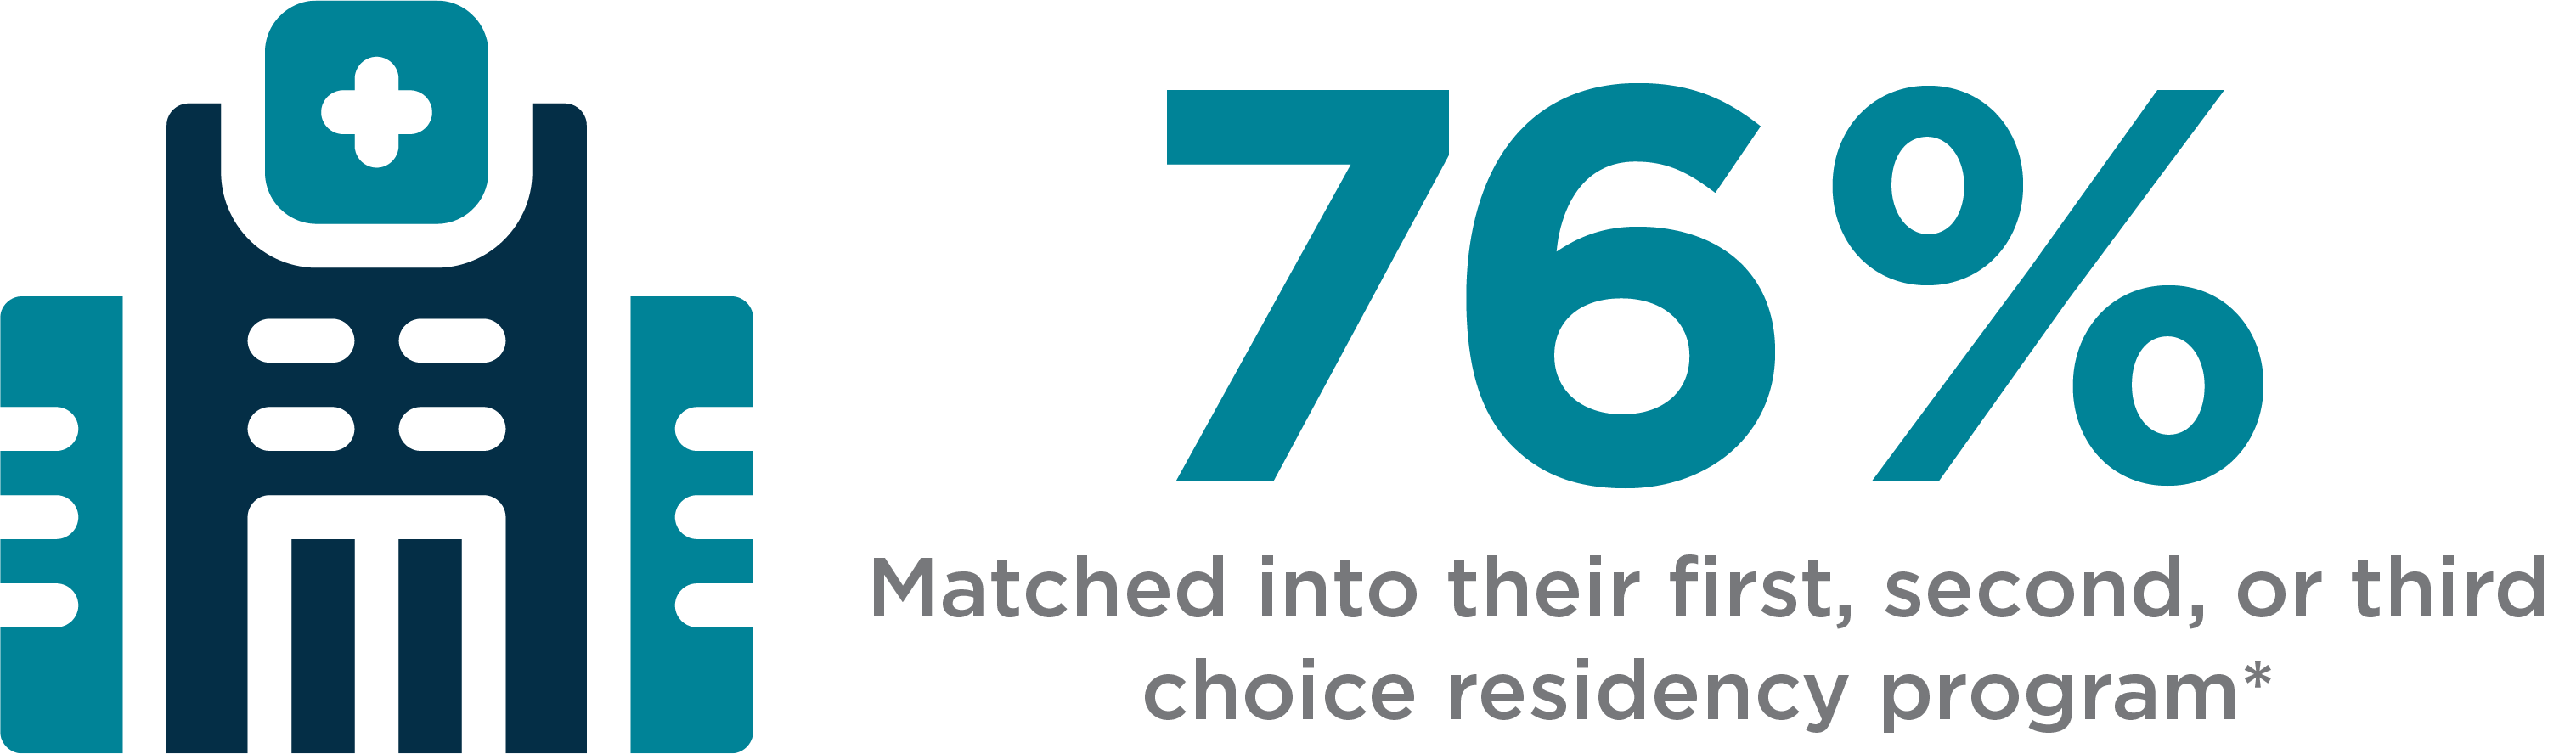 76 percent matched into their first, second, or third choice residency